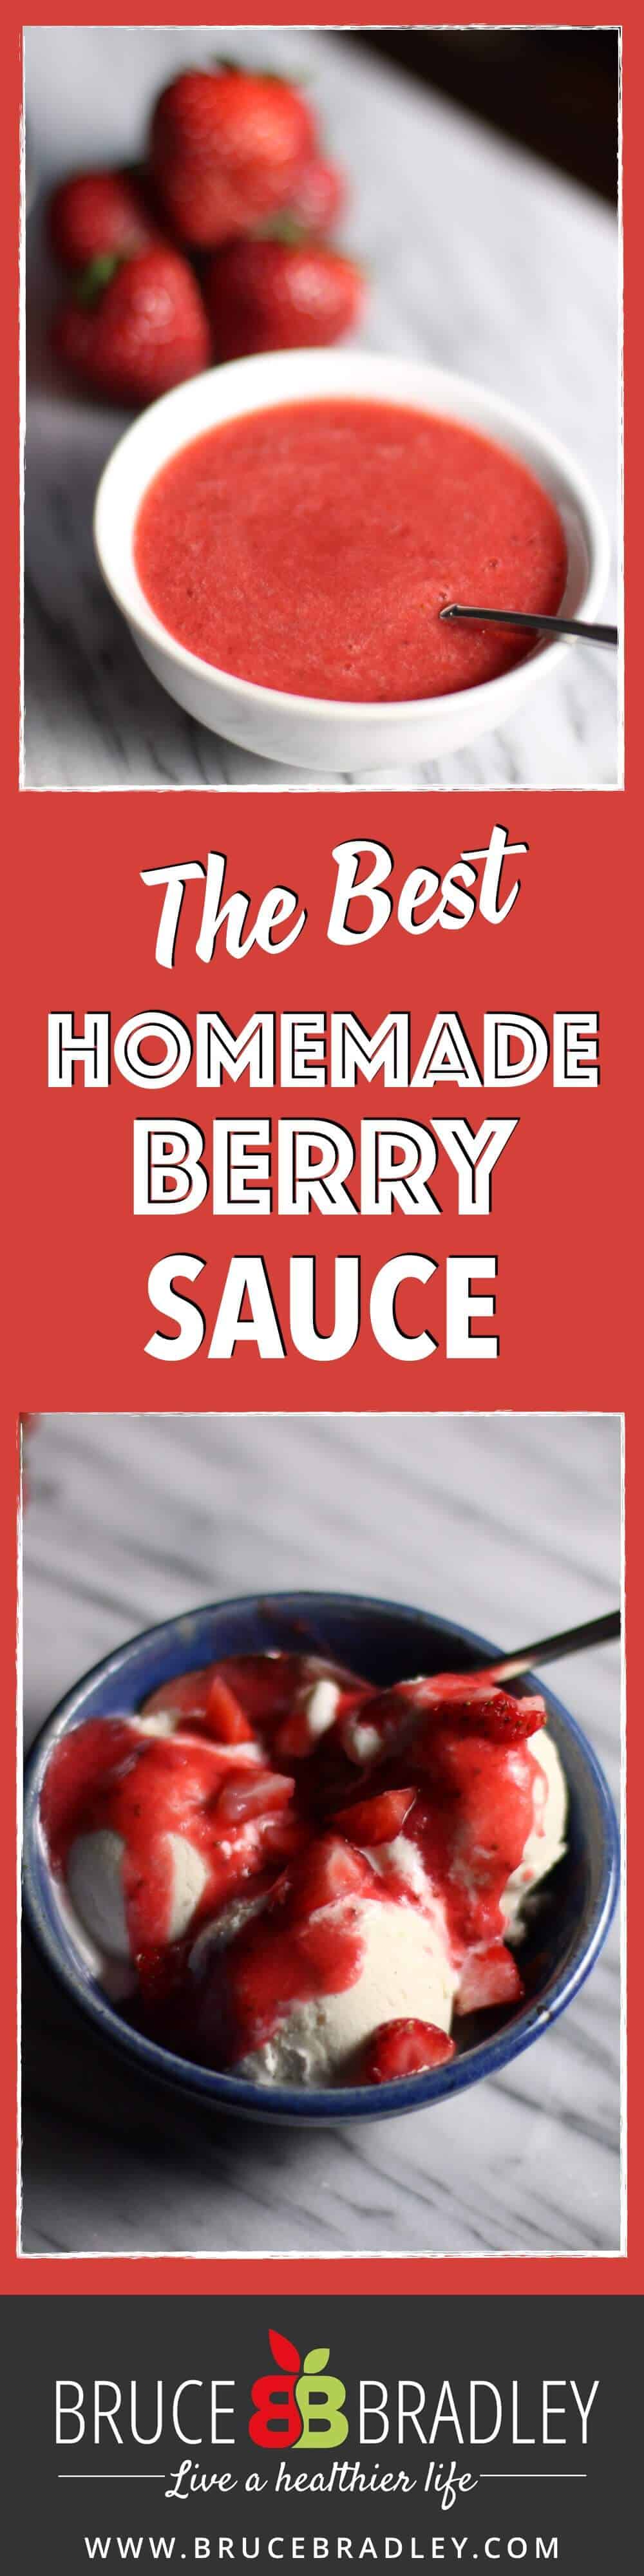 Our Homemade Berry Sauce Is Made With Just 2 Ingredients And It'S A Great Way To Add Lots Of Flavor To Yogurt, Desserts, Pancakes, Or Waffles!